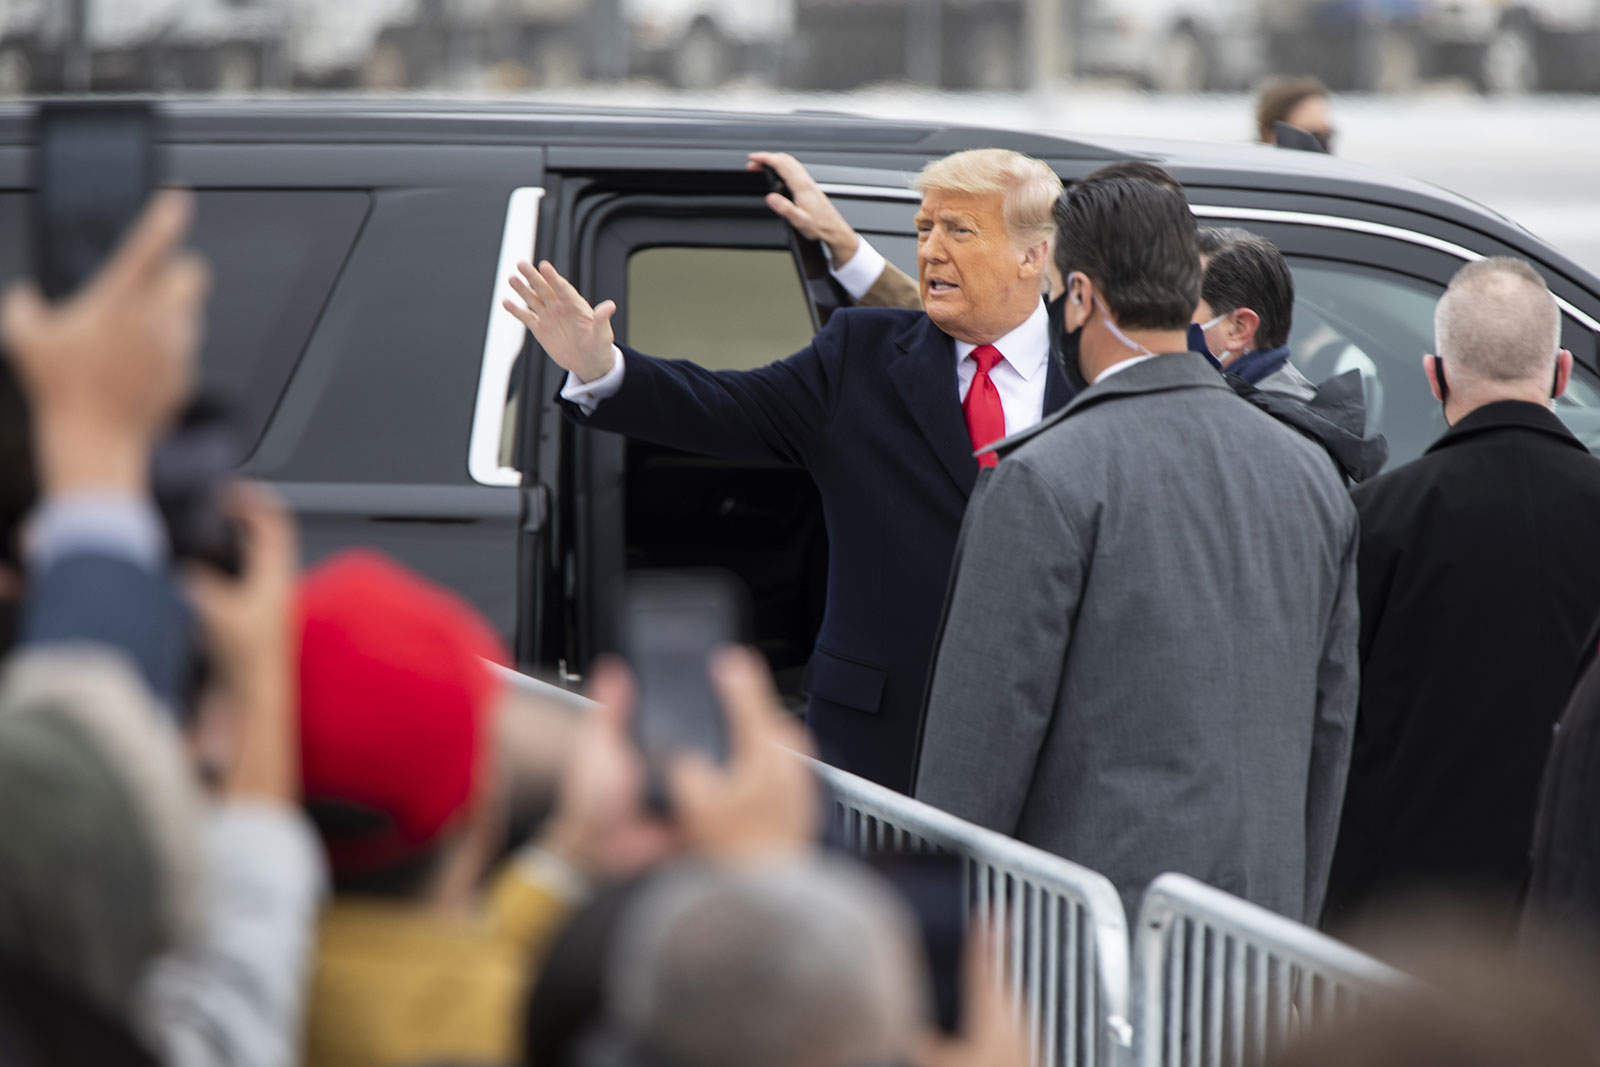 Former President Donald Trump greets supporters after arriving in Harlingen, Texas, on January 12, 2021.